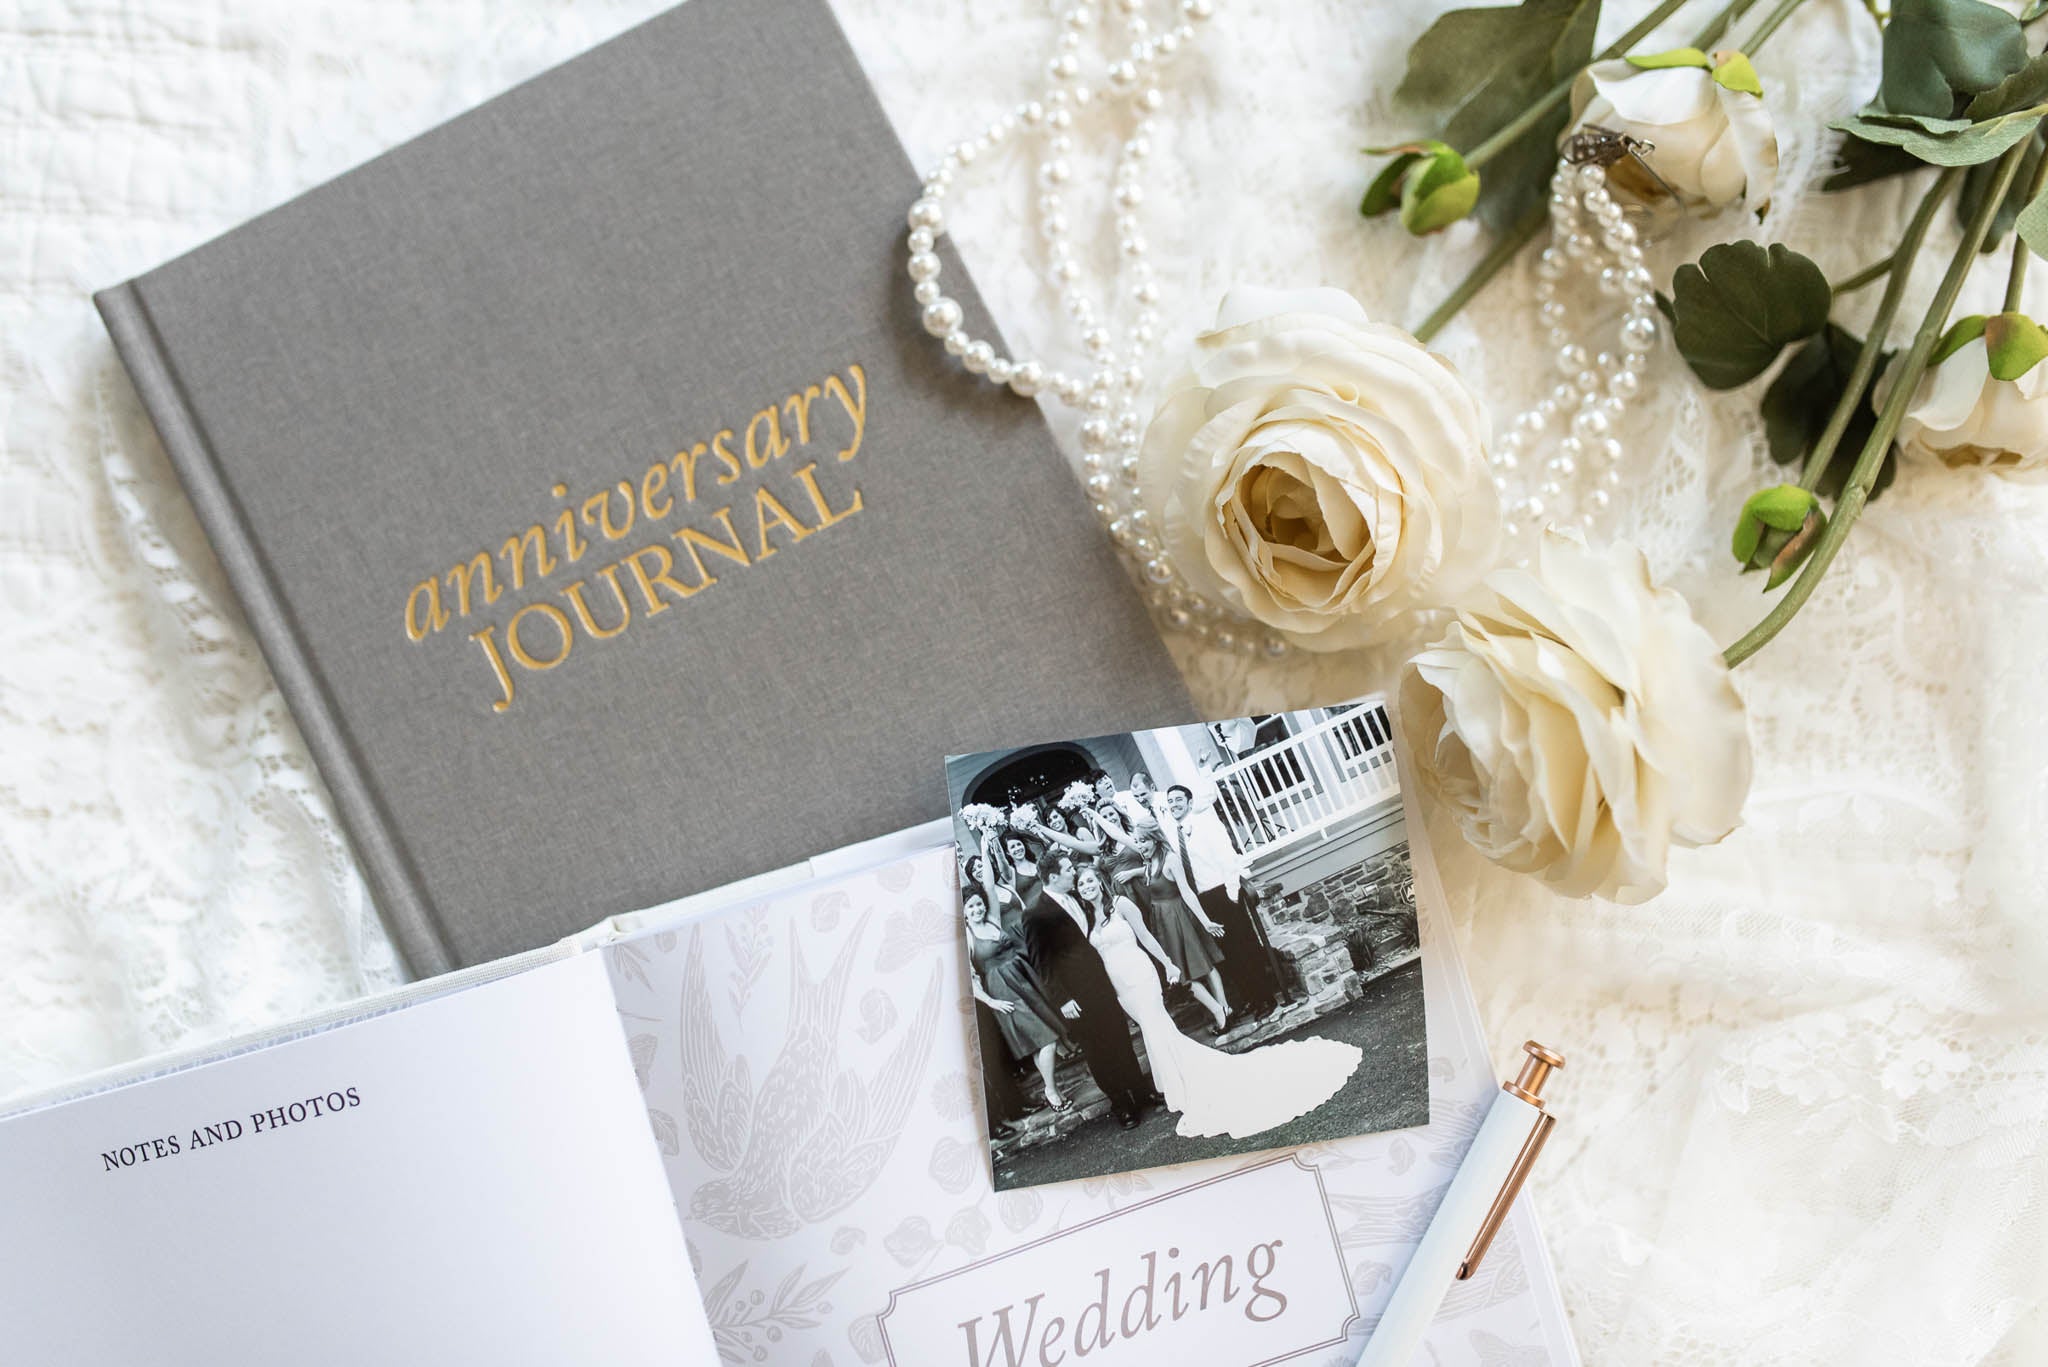 Wedding Anniversary Memory Book  A Hardcover Journal To Document